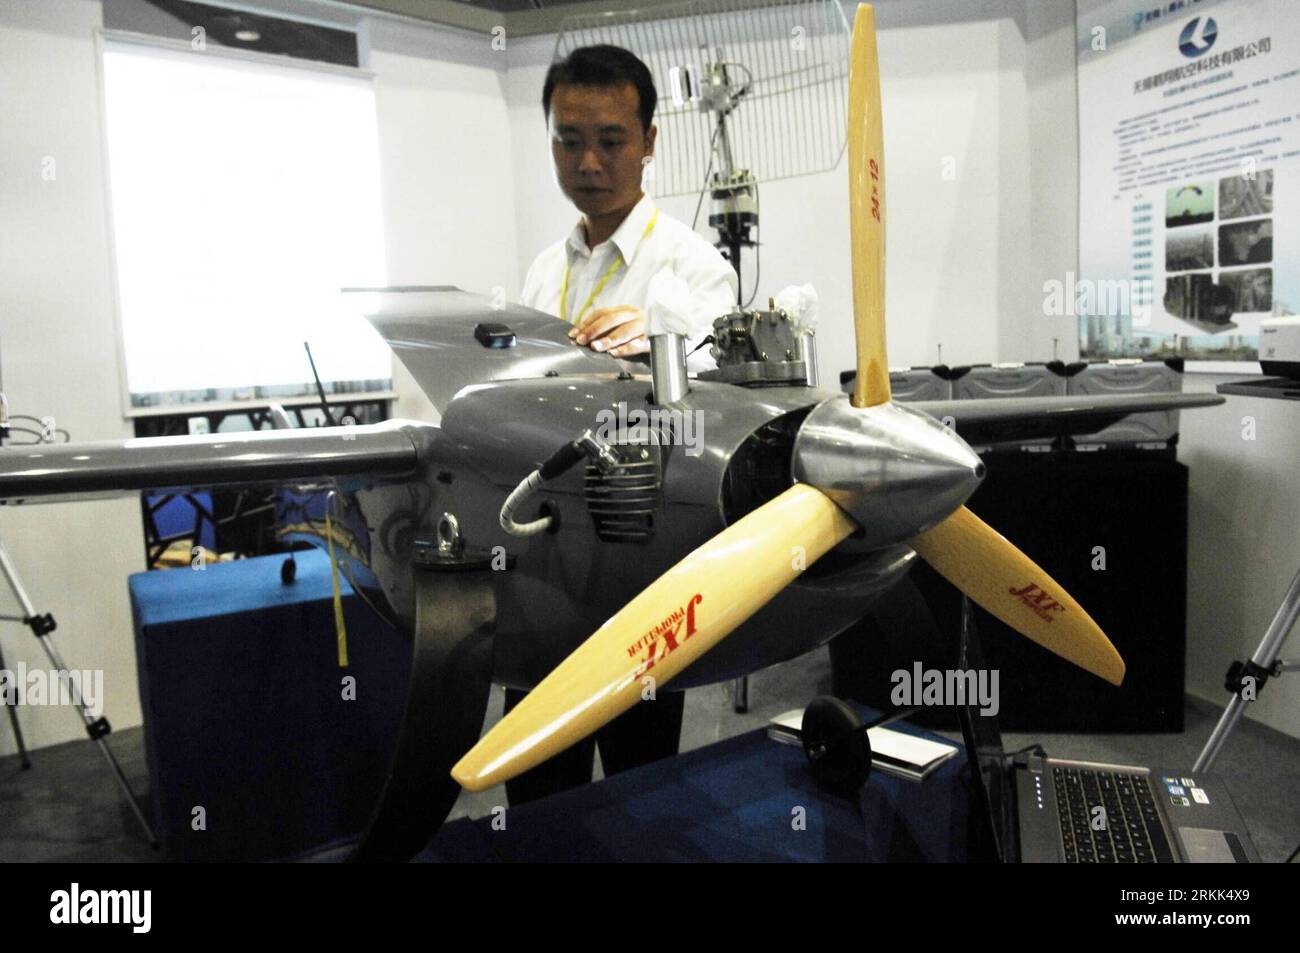 Bildnummer: 56199945  Datum: 20.10.2011  Copyright: imago/Xinhua (111020) -- WUXI, Oct. 20, 2011 (Xinhua) -- A staff member adjusts a plane model with IOT technology at the 2011 China International Internet of Things Exposition (IOT Expo 2011) in Wuxi of east China s Jiangsu Province, Oct. 20, 2011. The IOT Expo 2011 kicked off here on Thursday, attracting more than 600 companies from at home and abroad. (Xinhua/Shen Peng) (xzj) CHINA-JIANGSU-WUXI-IOT EXPO 2011 (CN) PUBLICATIONxNOTxINxCHN Wirtschaft Elektroindustrie Elektronikmesse der Dinge Messe xns x2x 2011 quer o0 Flugzeug, Modell, Modellf Stock Photo